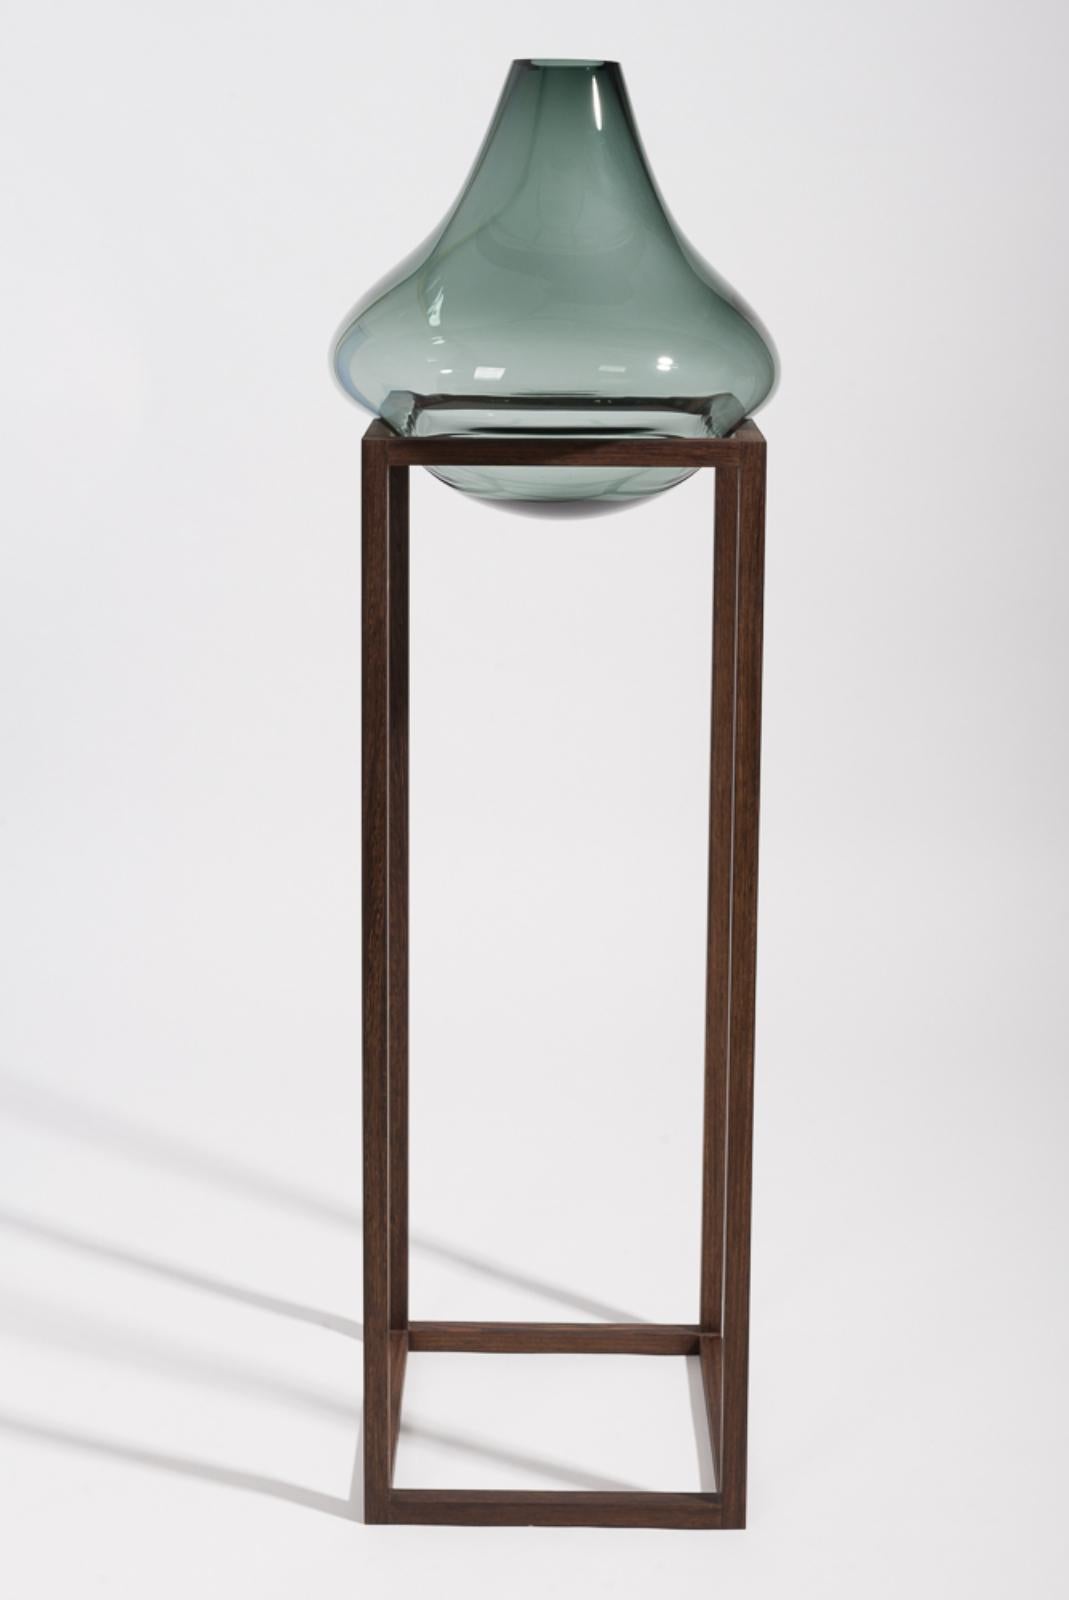 Set of 2 high round square green vase by Studio Thier & van Daalen.
Dimensions: W 36 x D 36 x H 120 cm.
Materials: wood, glass.

When blowing soap bubbles in the air Iris & Ruben had the dream to capture these temporary beauties in a tendril